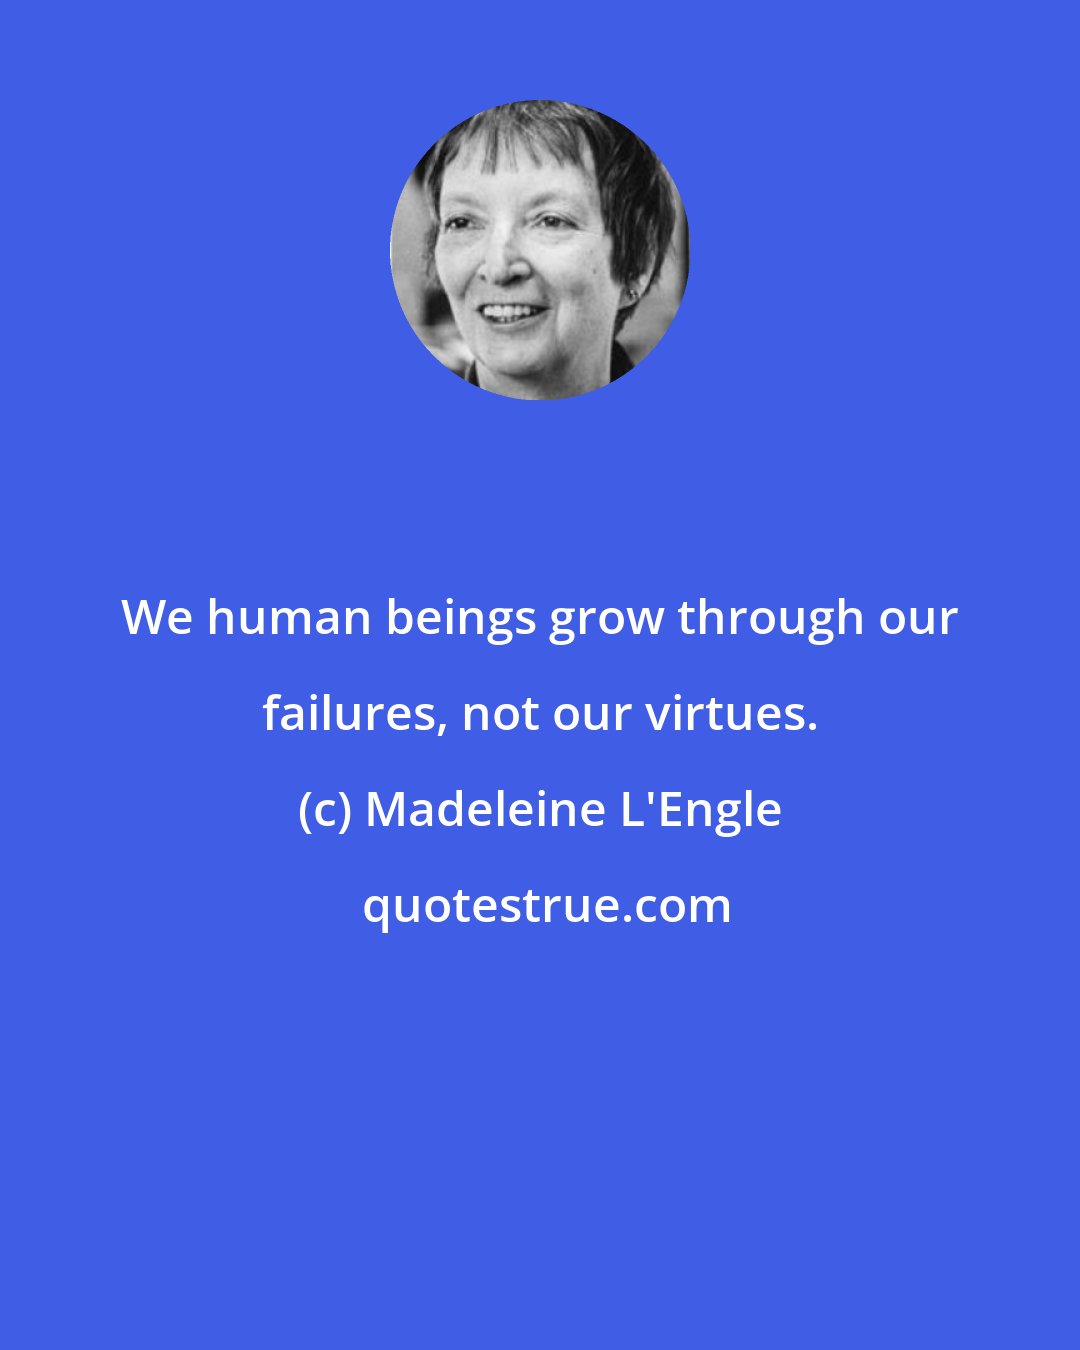 Madeleine L'Engle: We human beings grow through our failures, not our virtues.